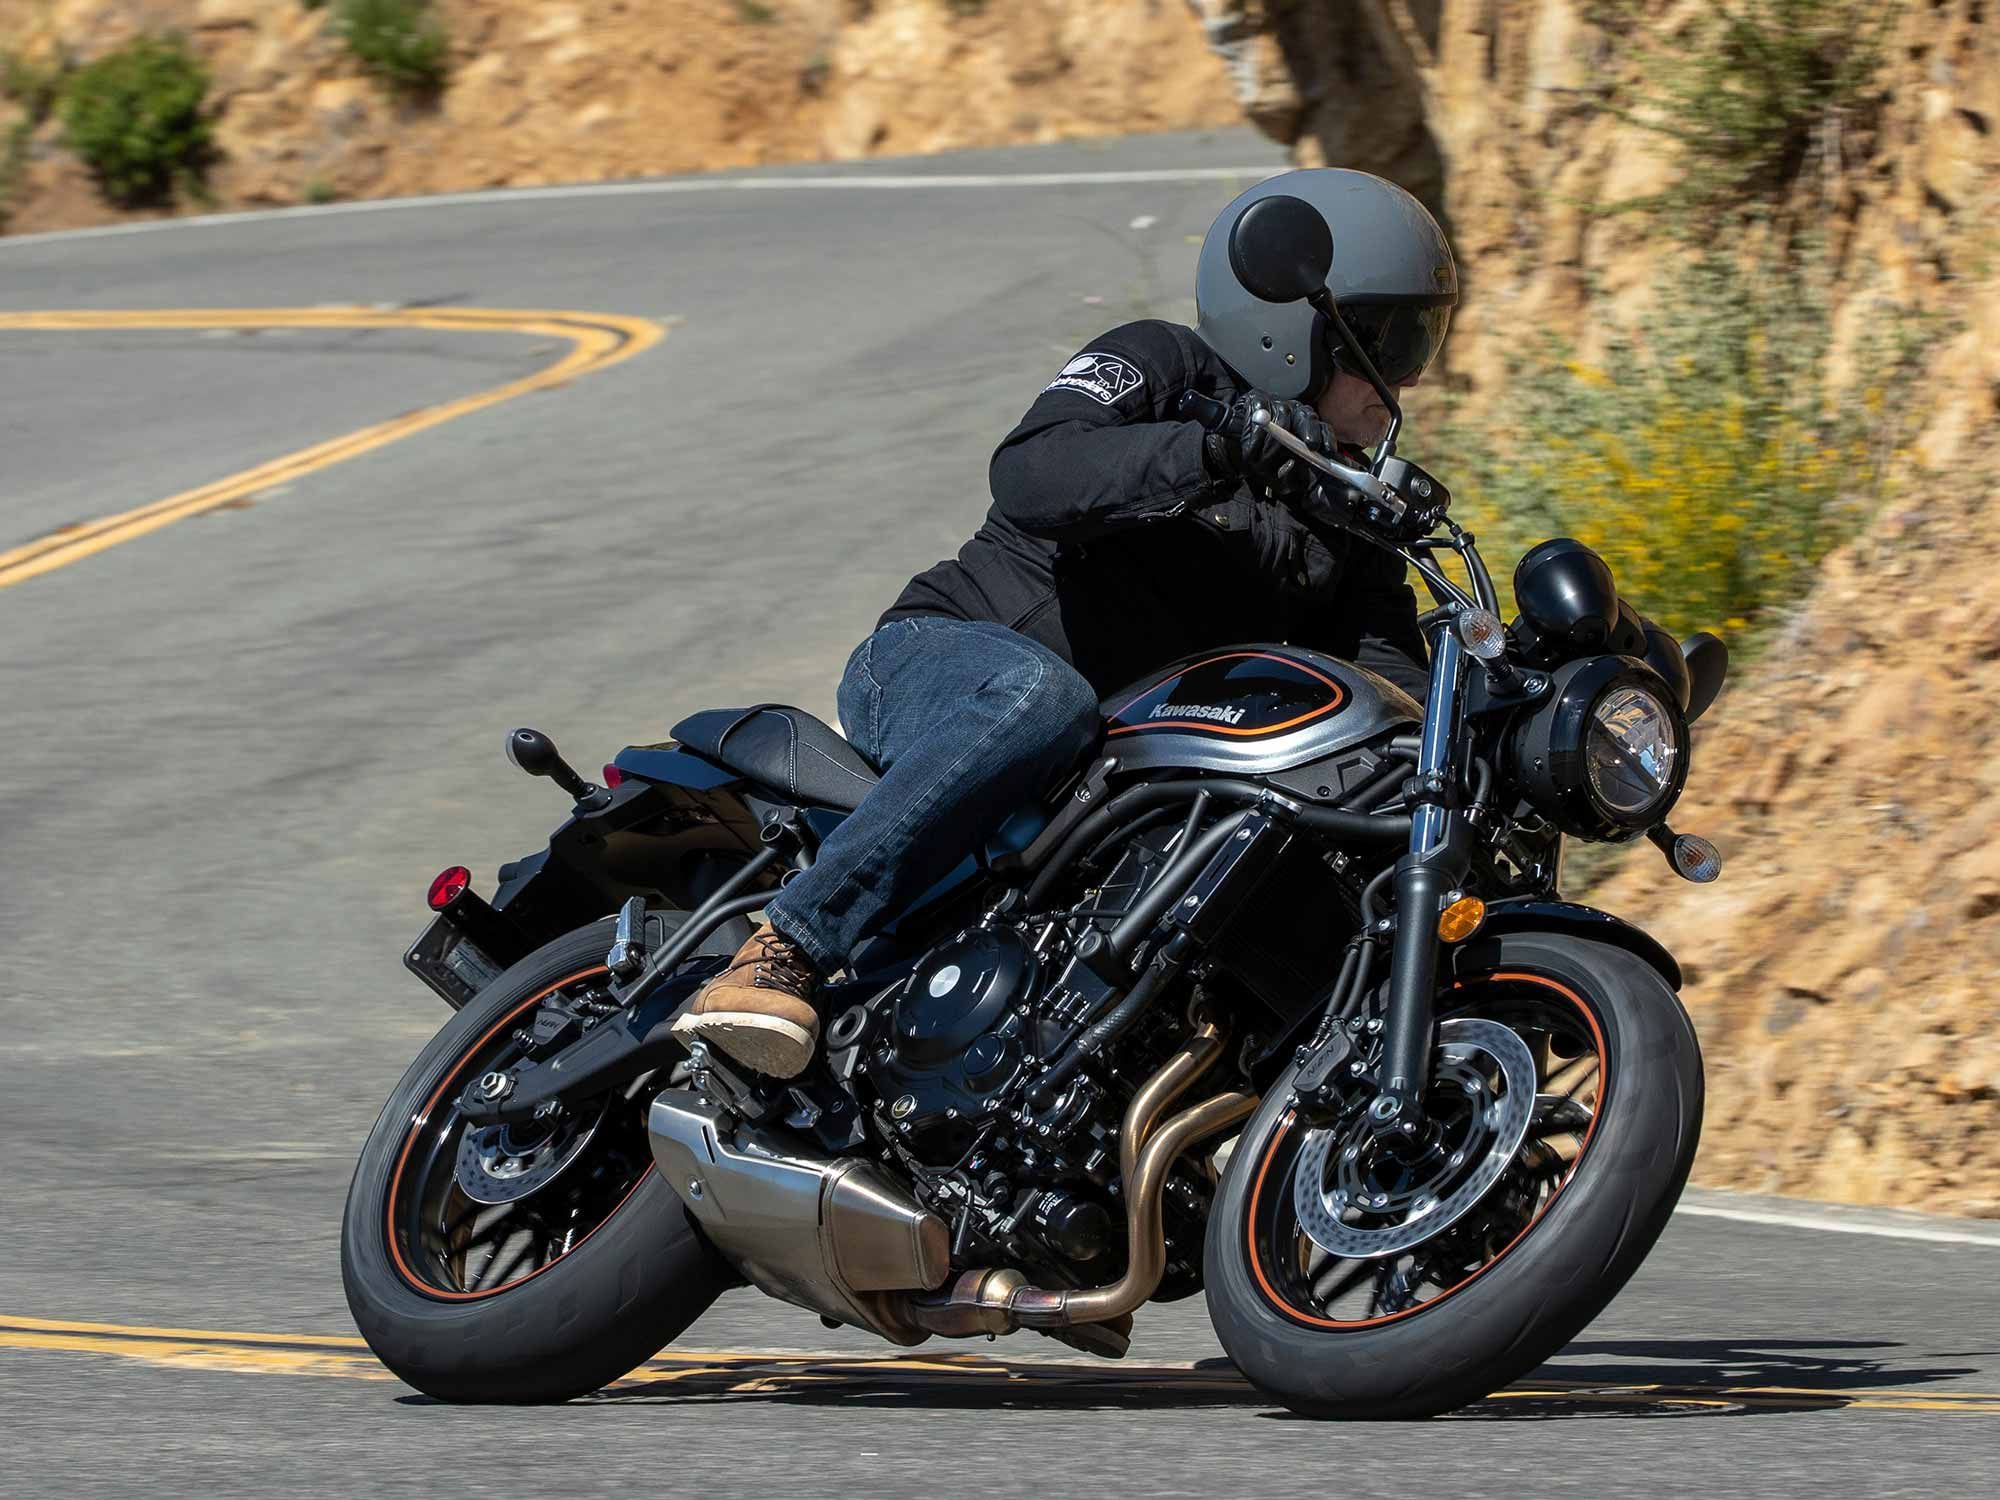 Ergonomics specific to the Z650RS include a higher and closer handlebar, a slightly taller seat, and lower footpeg positioning, which fit the 5-foot-7 author just right.